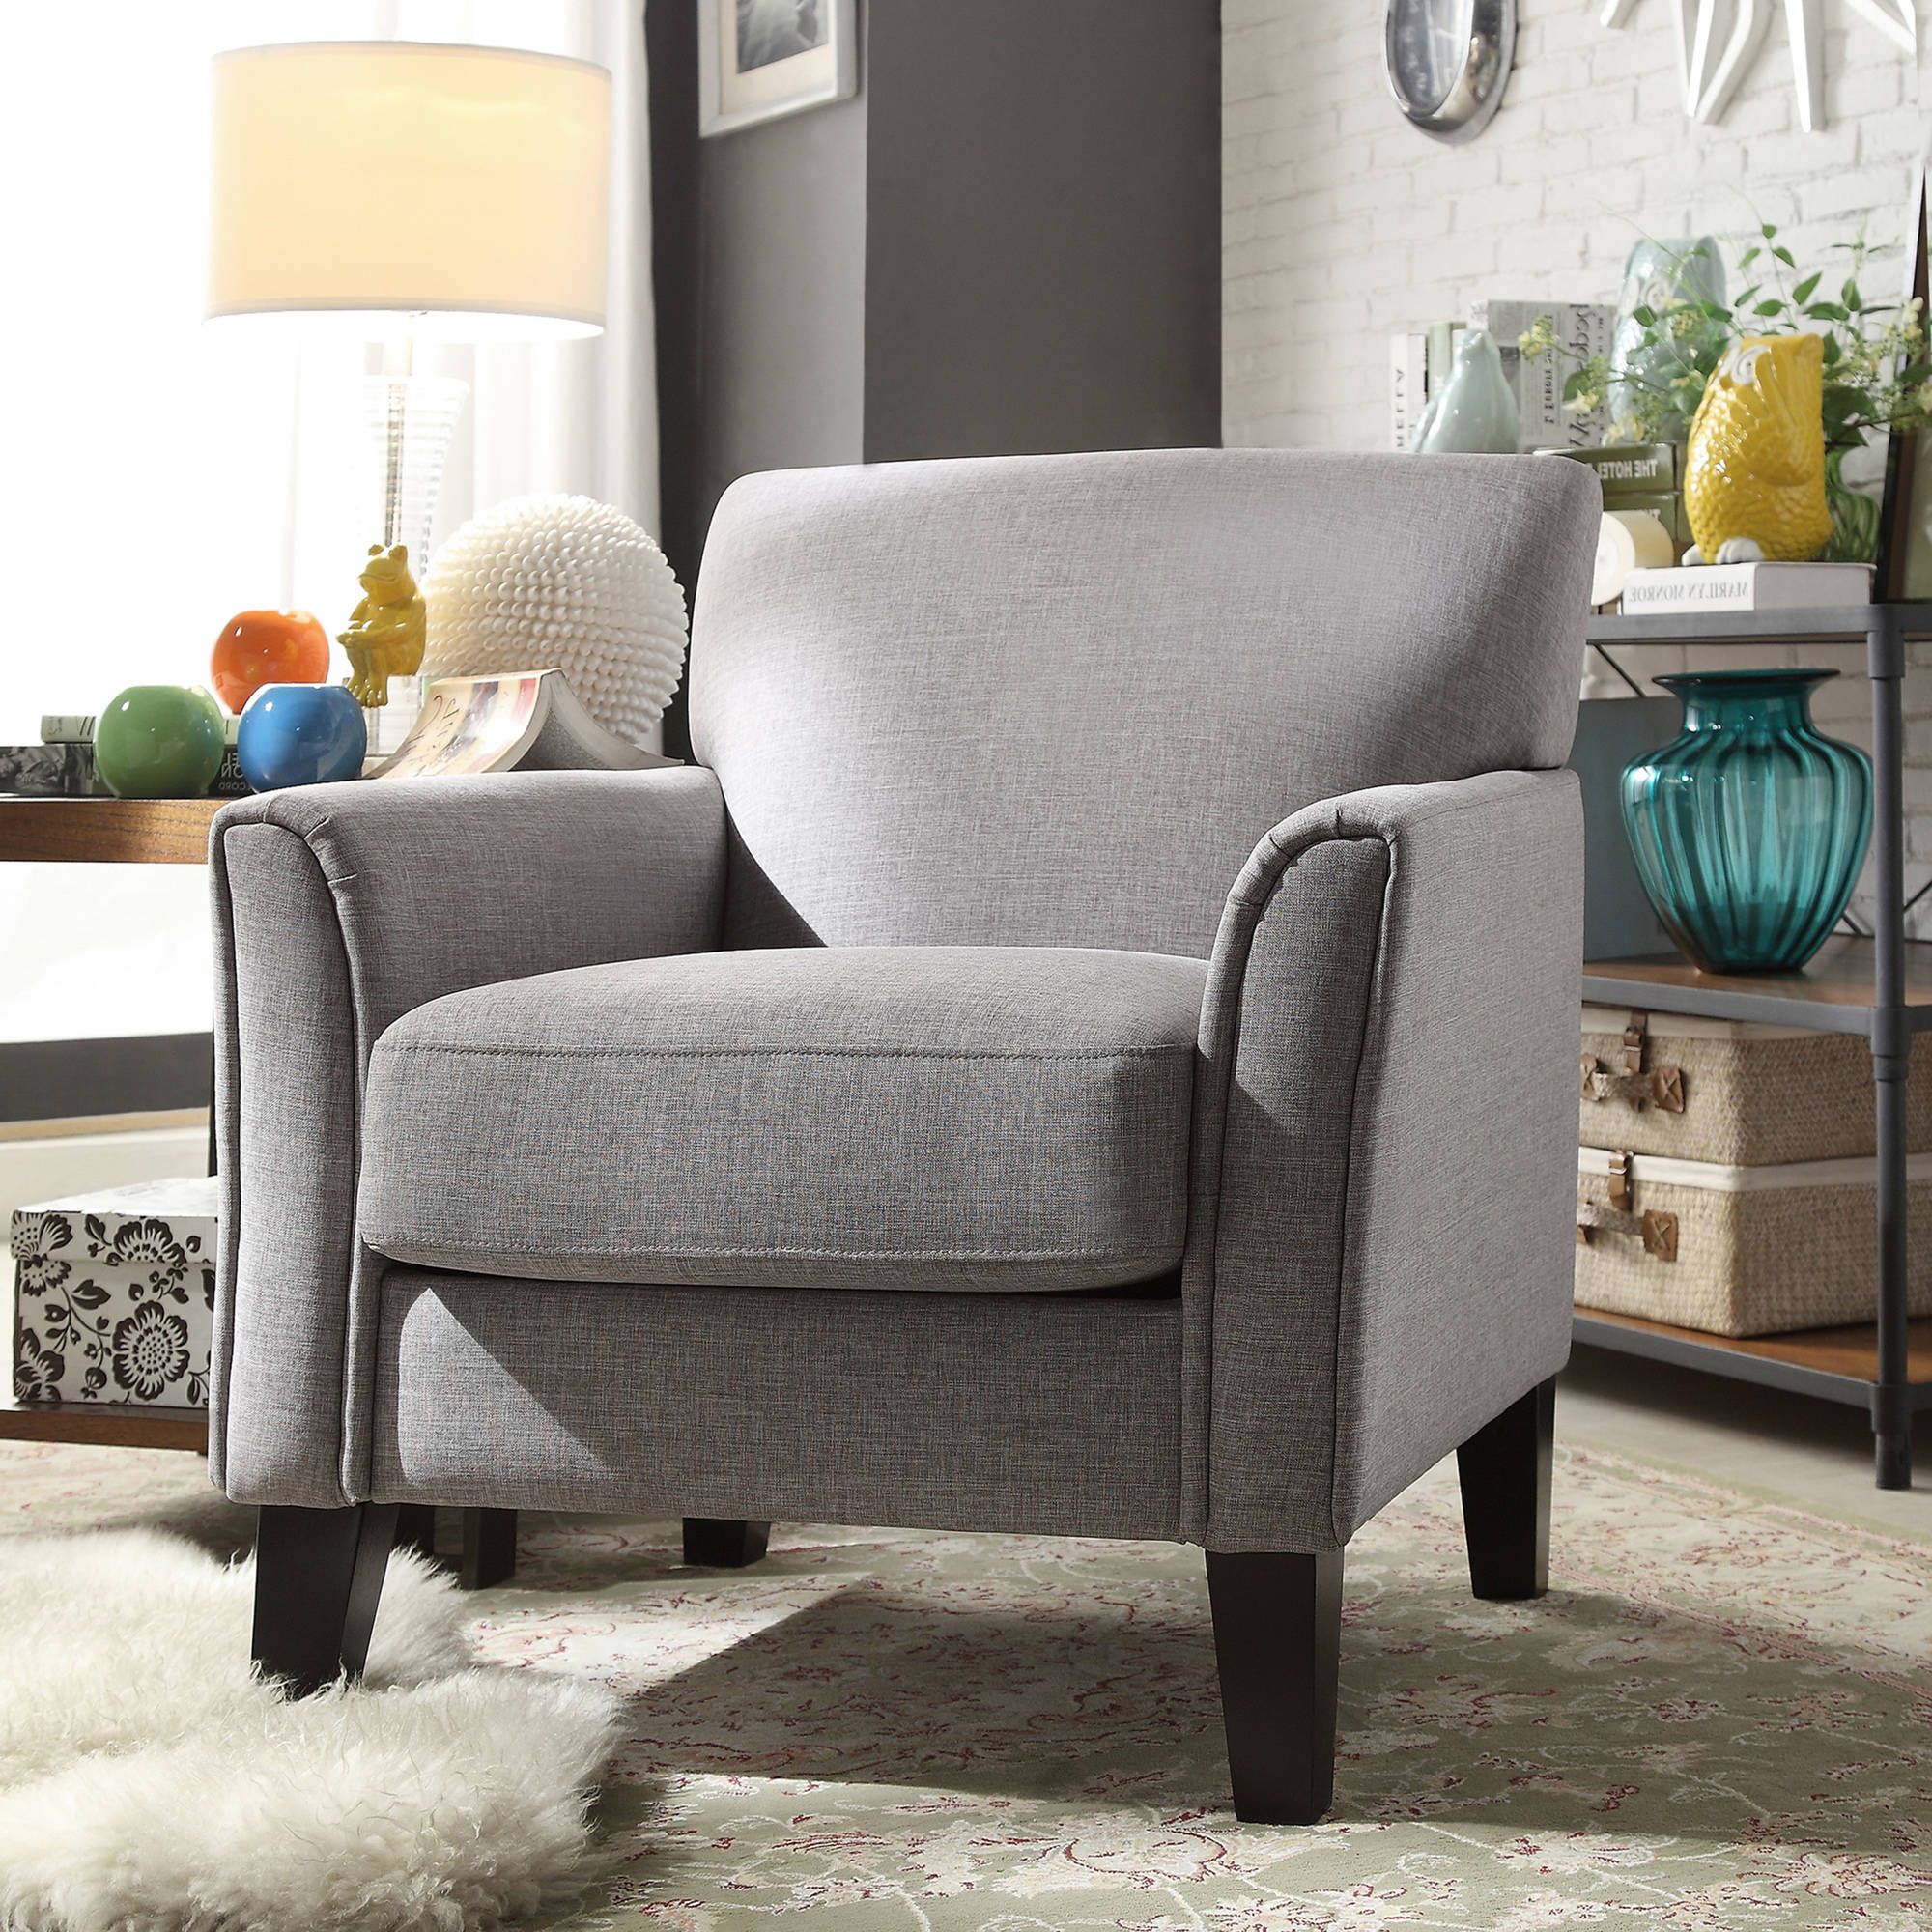 Newest Weston Home Tribeca Living Room Upholstered Accent Chair, Grey Linen Intended For Smoke Gray Wood Accent Stools (View 1 of 10)